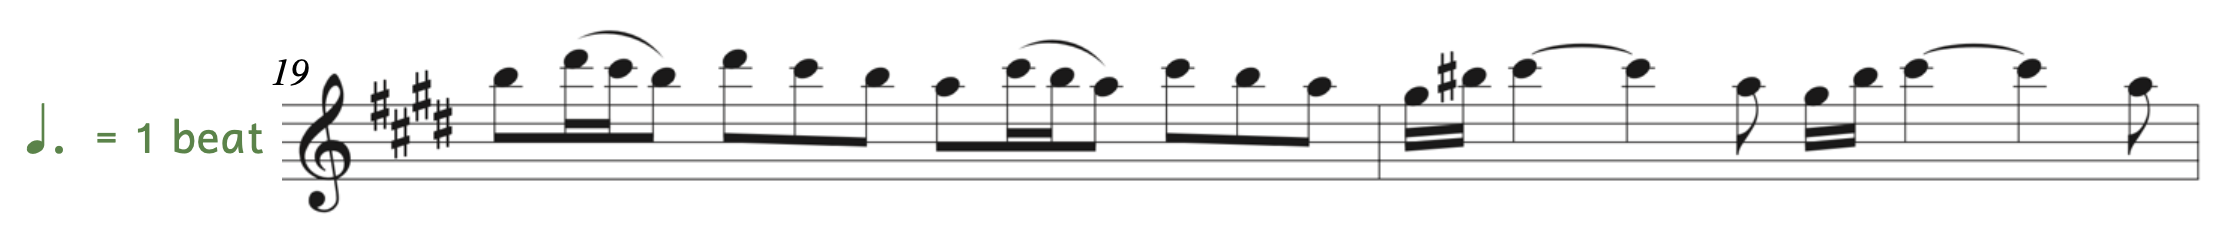 Exercise from Vivaldi's Four Seasons. The dotted quarter note equals one beat. The example begins on measure 19. Measure 19 contains an eighth note beamed to two sixteenth notes and an eighth note, three eighth notes beamed together, an eighth note beamed to two sixteenth notes and an eighth note, and three eighth notes beamed together. Measure 20 contains two sixteenth notes beamed together, two quarter notes, an eighth note, two sixteenth notes beamed together, two quarter notes, and an eighth note.